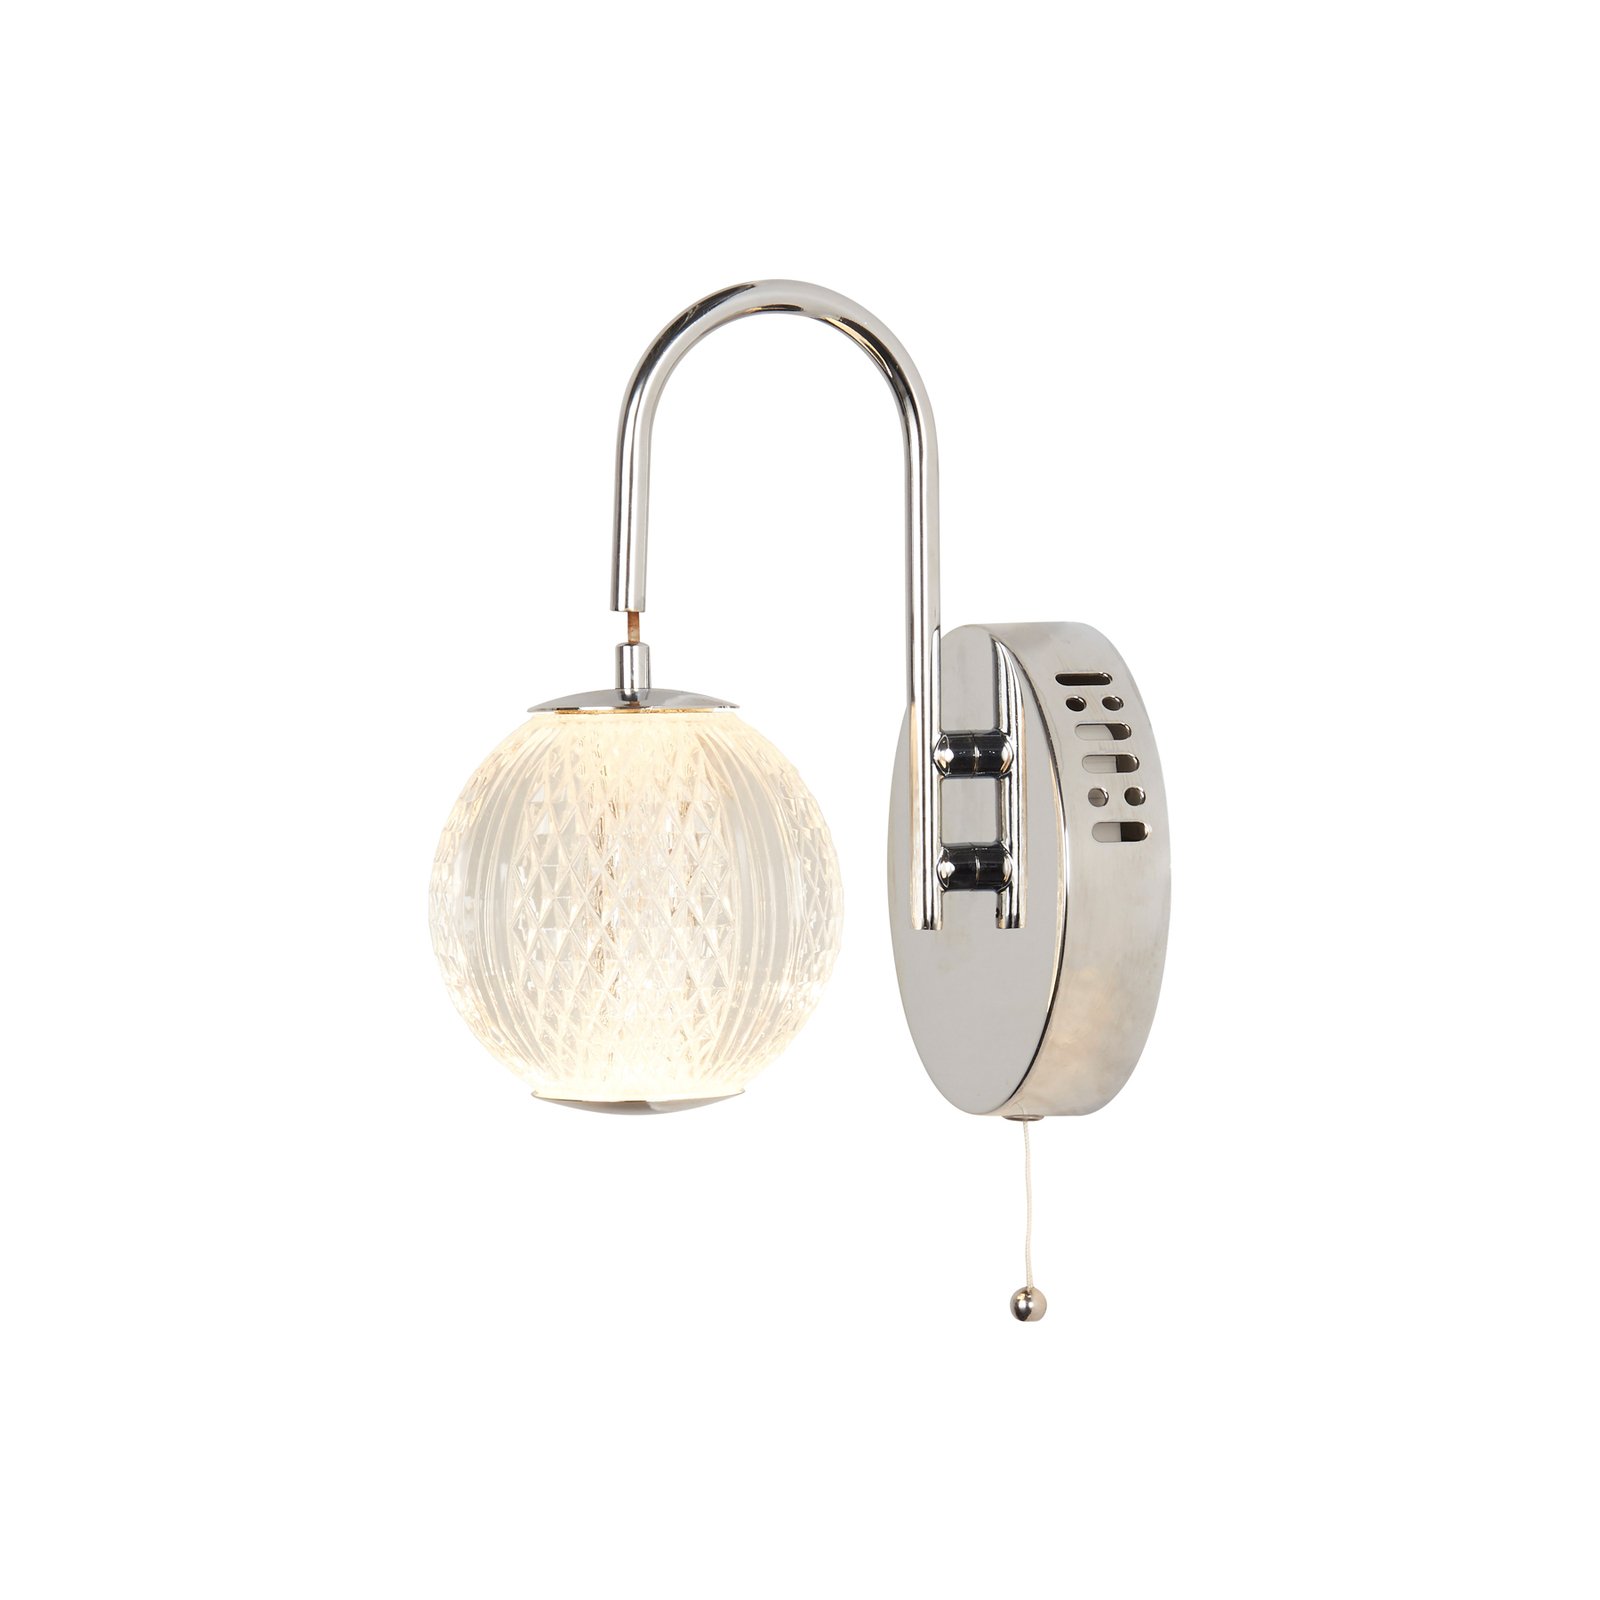 LED wall light Allure, pull cord switch